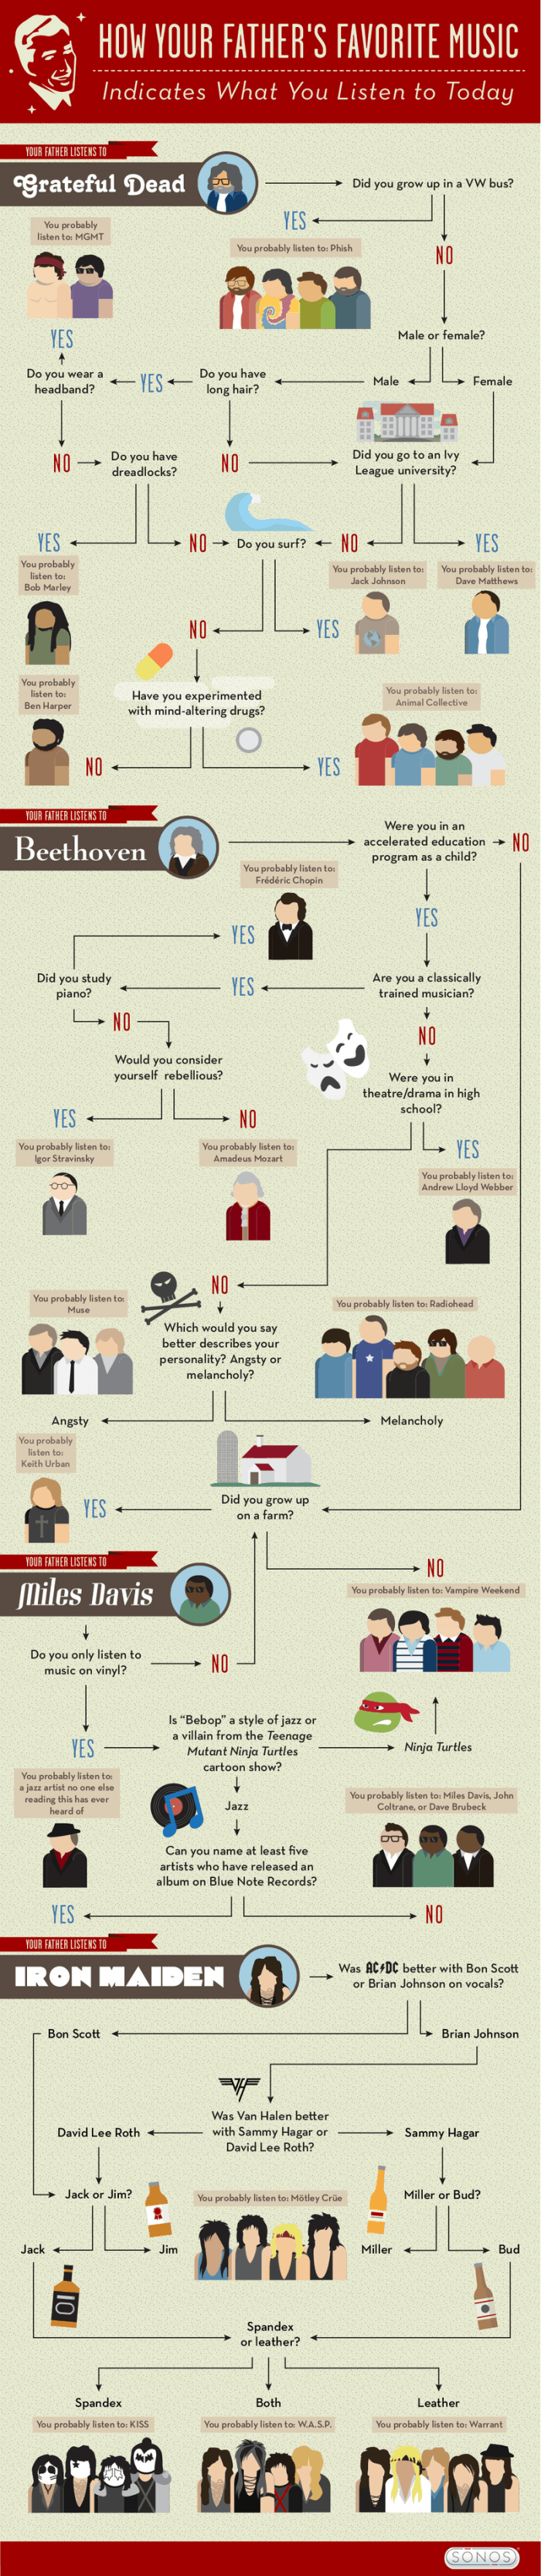 How Your Father's Favorite Music Infographic